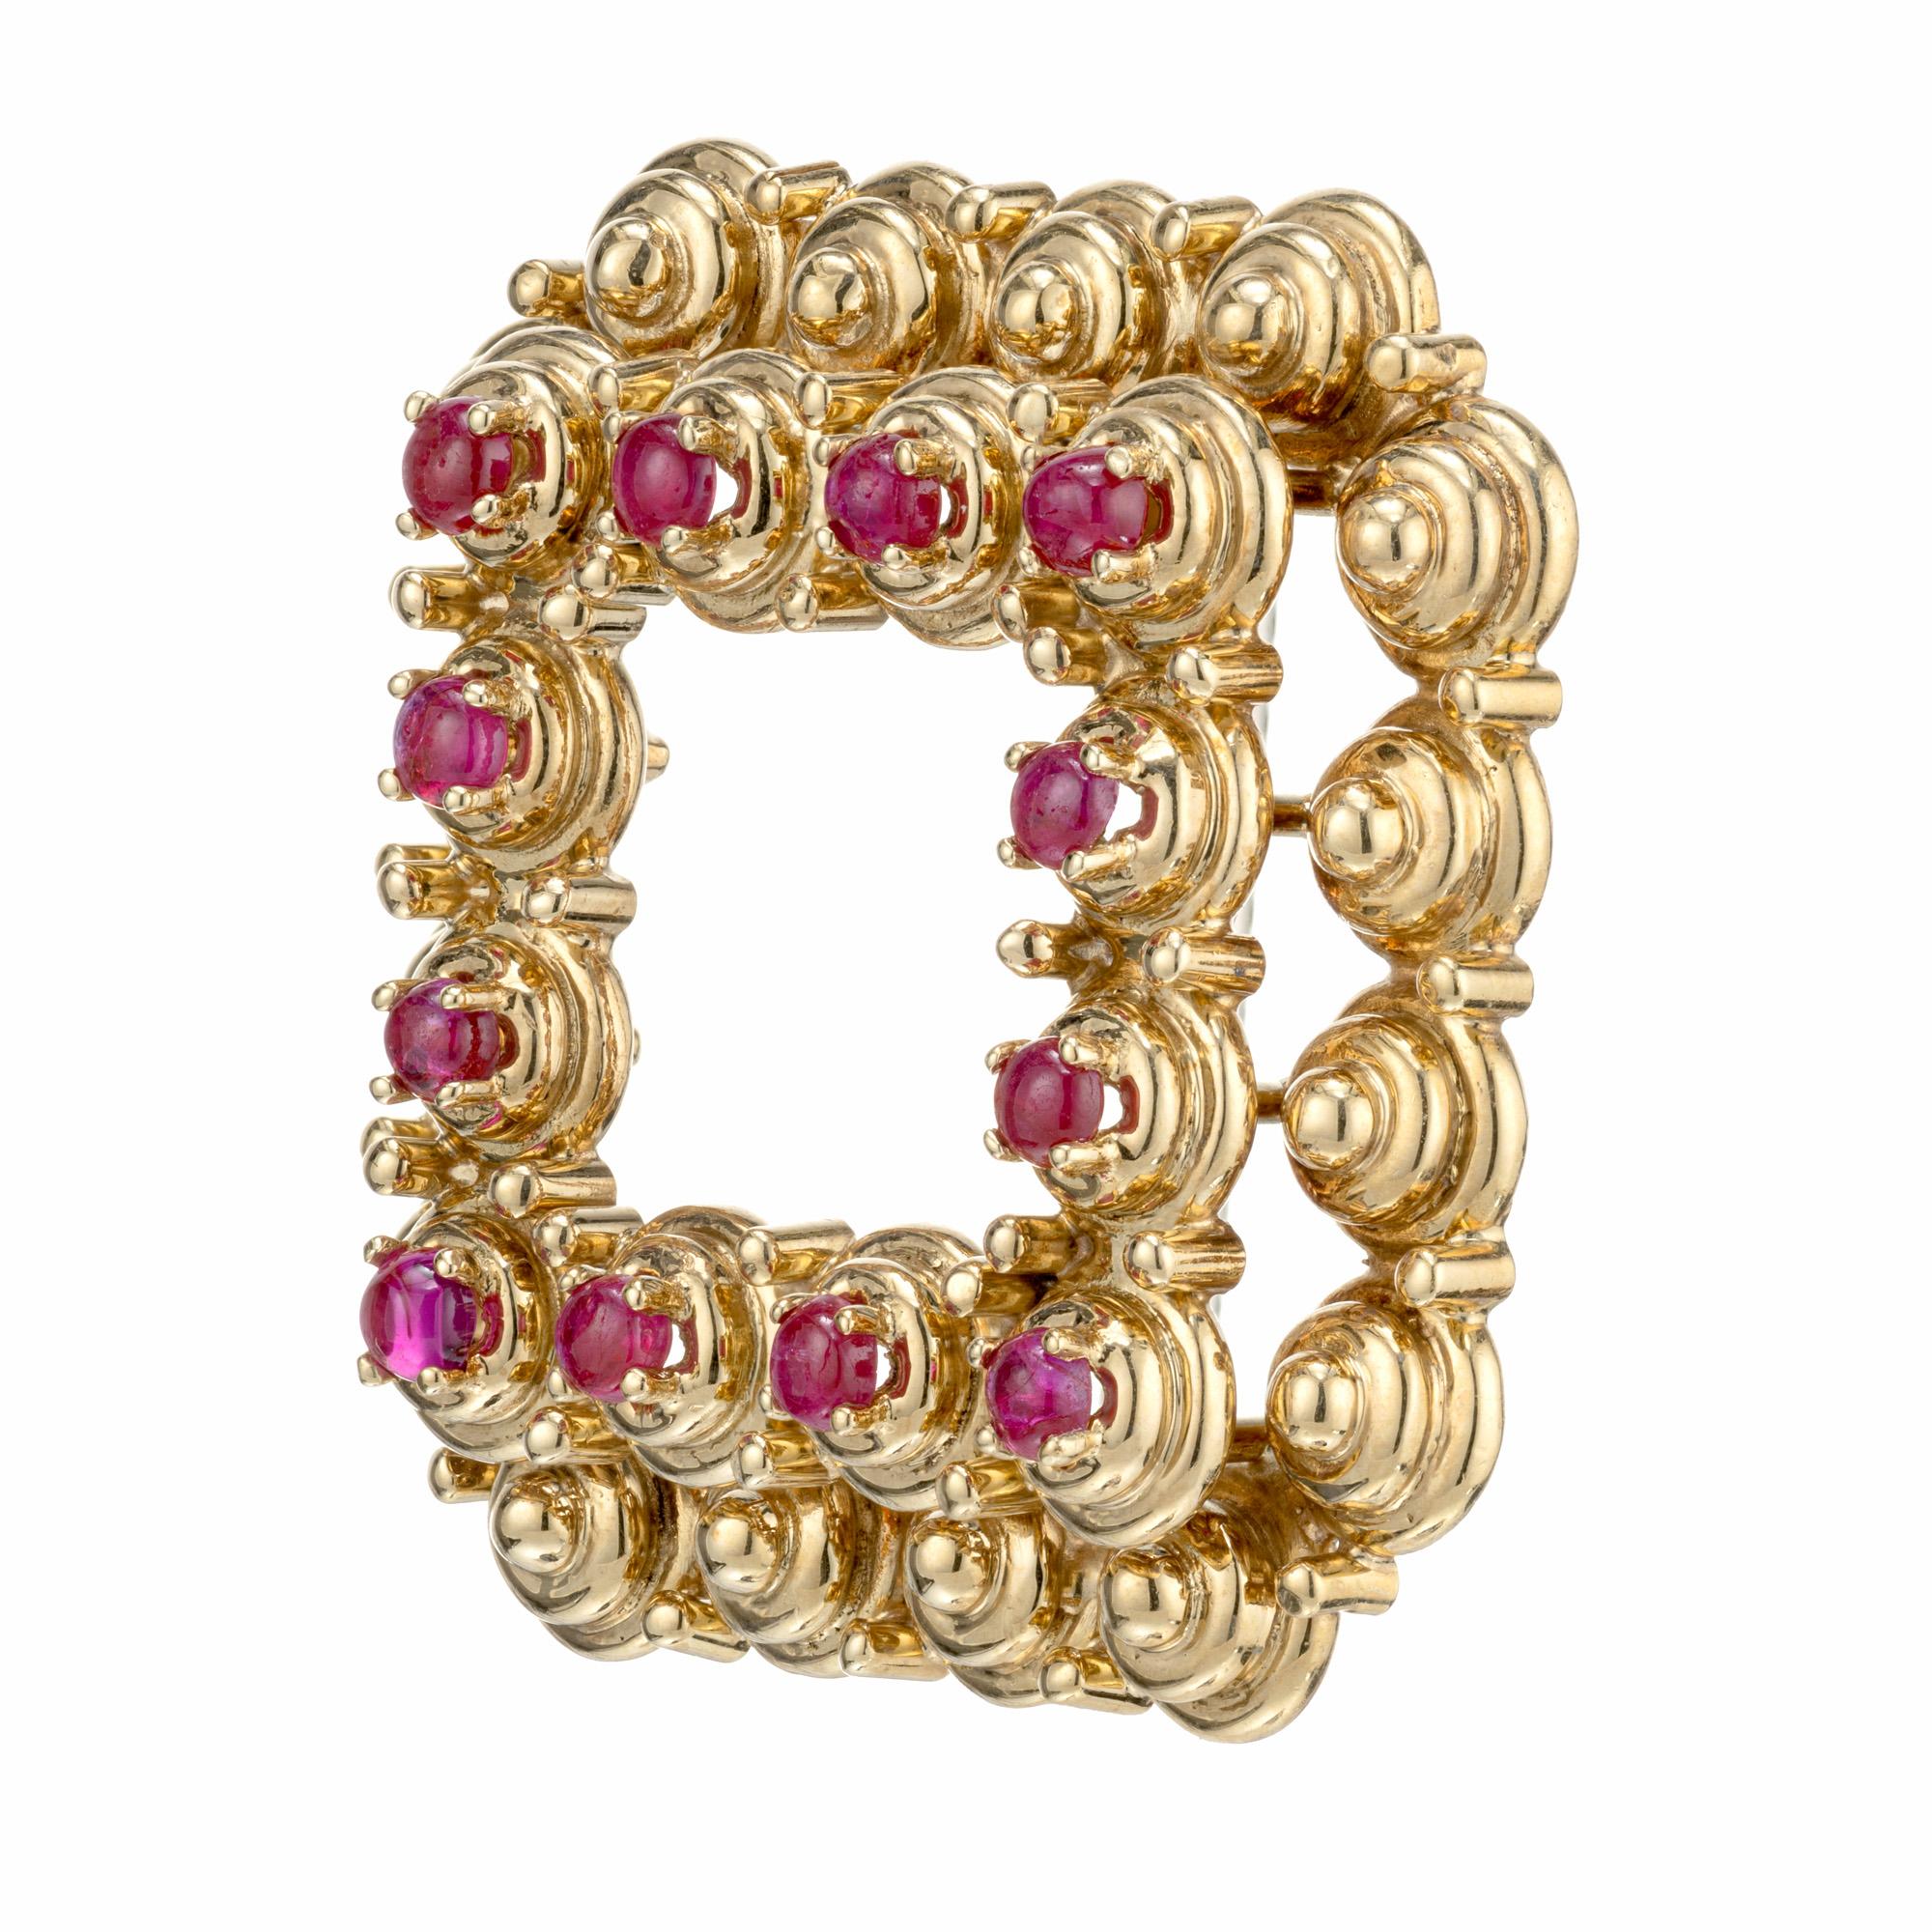 Tiffany & Co. ruby brooch. 12 round cabochon cut rubies in a square 18k yellow gold brooch. Circa 1950-1960.

12 2.5mm genuine natural cabochon Rubies, gem color
18k Yellow Gold
Stamped: Tiffany + Co 18k Italy
16.5 grams
Pin: 1.13 inches or 29mm